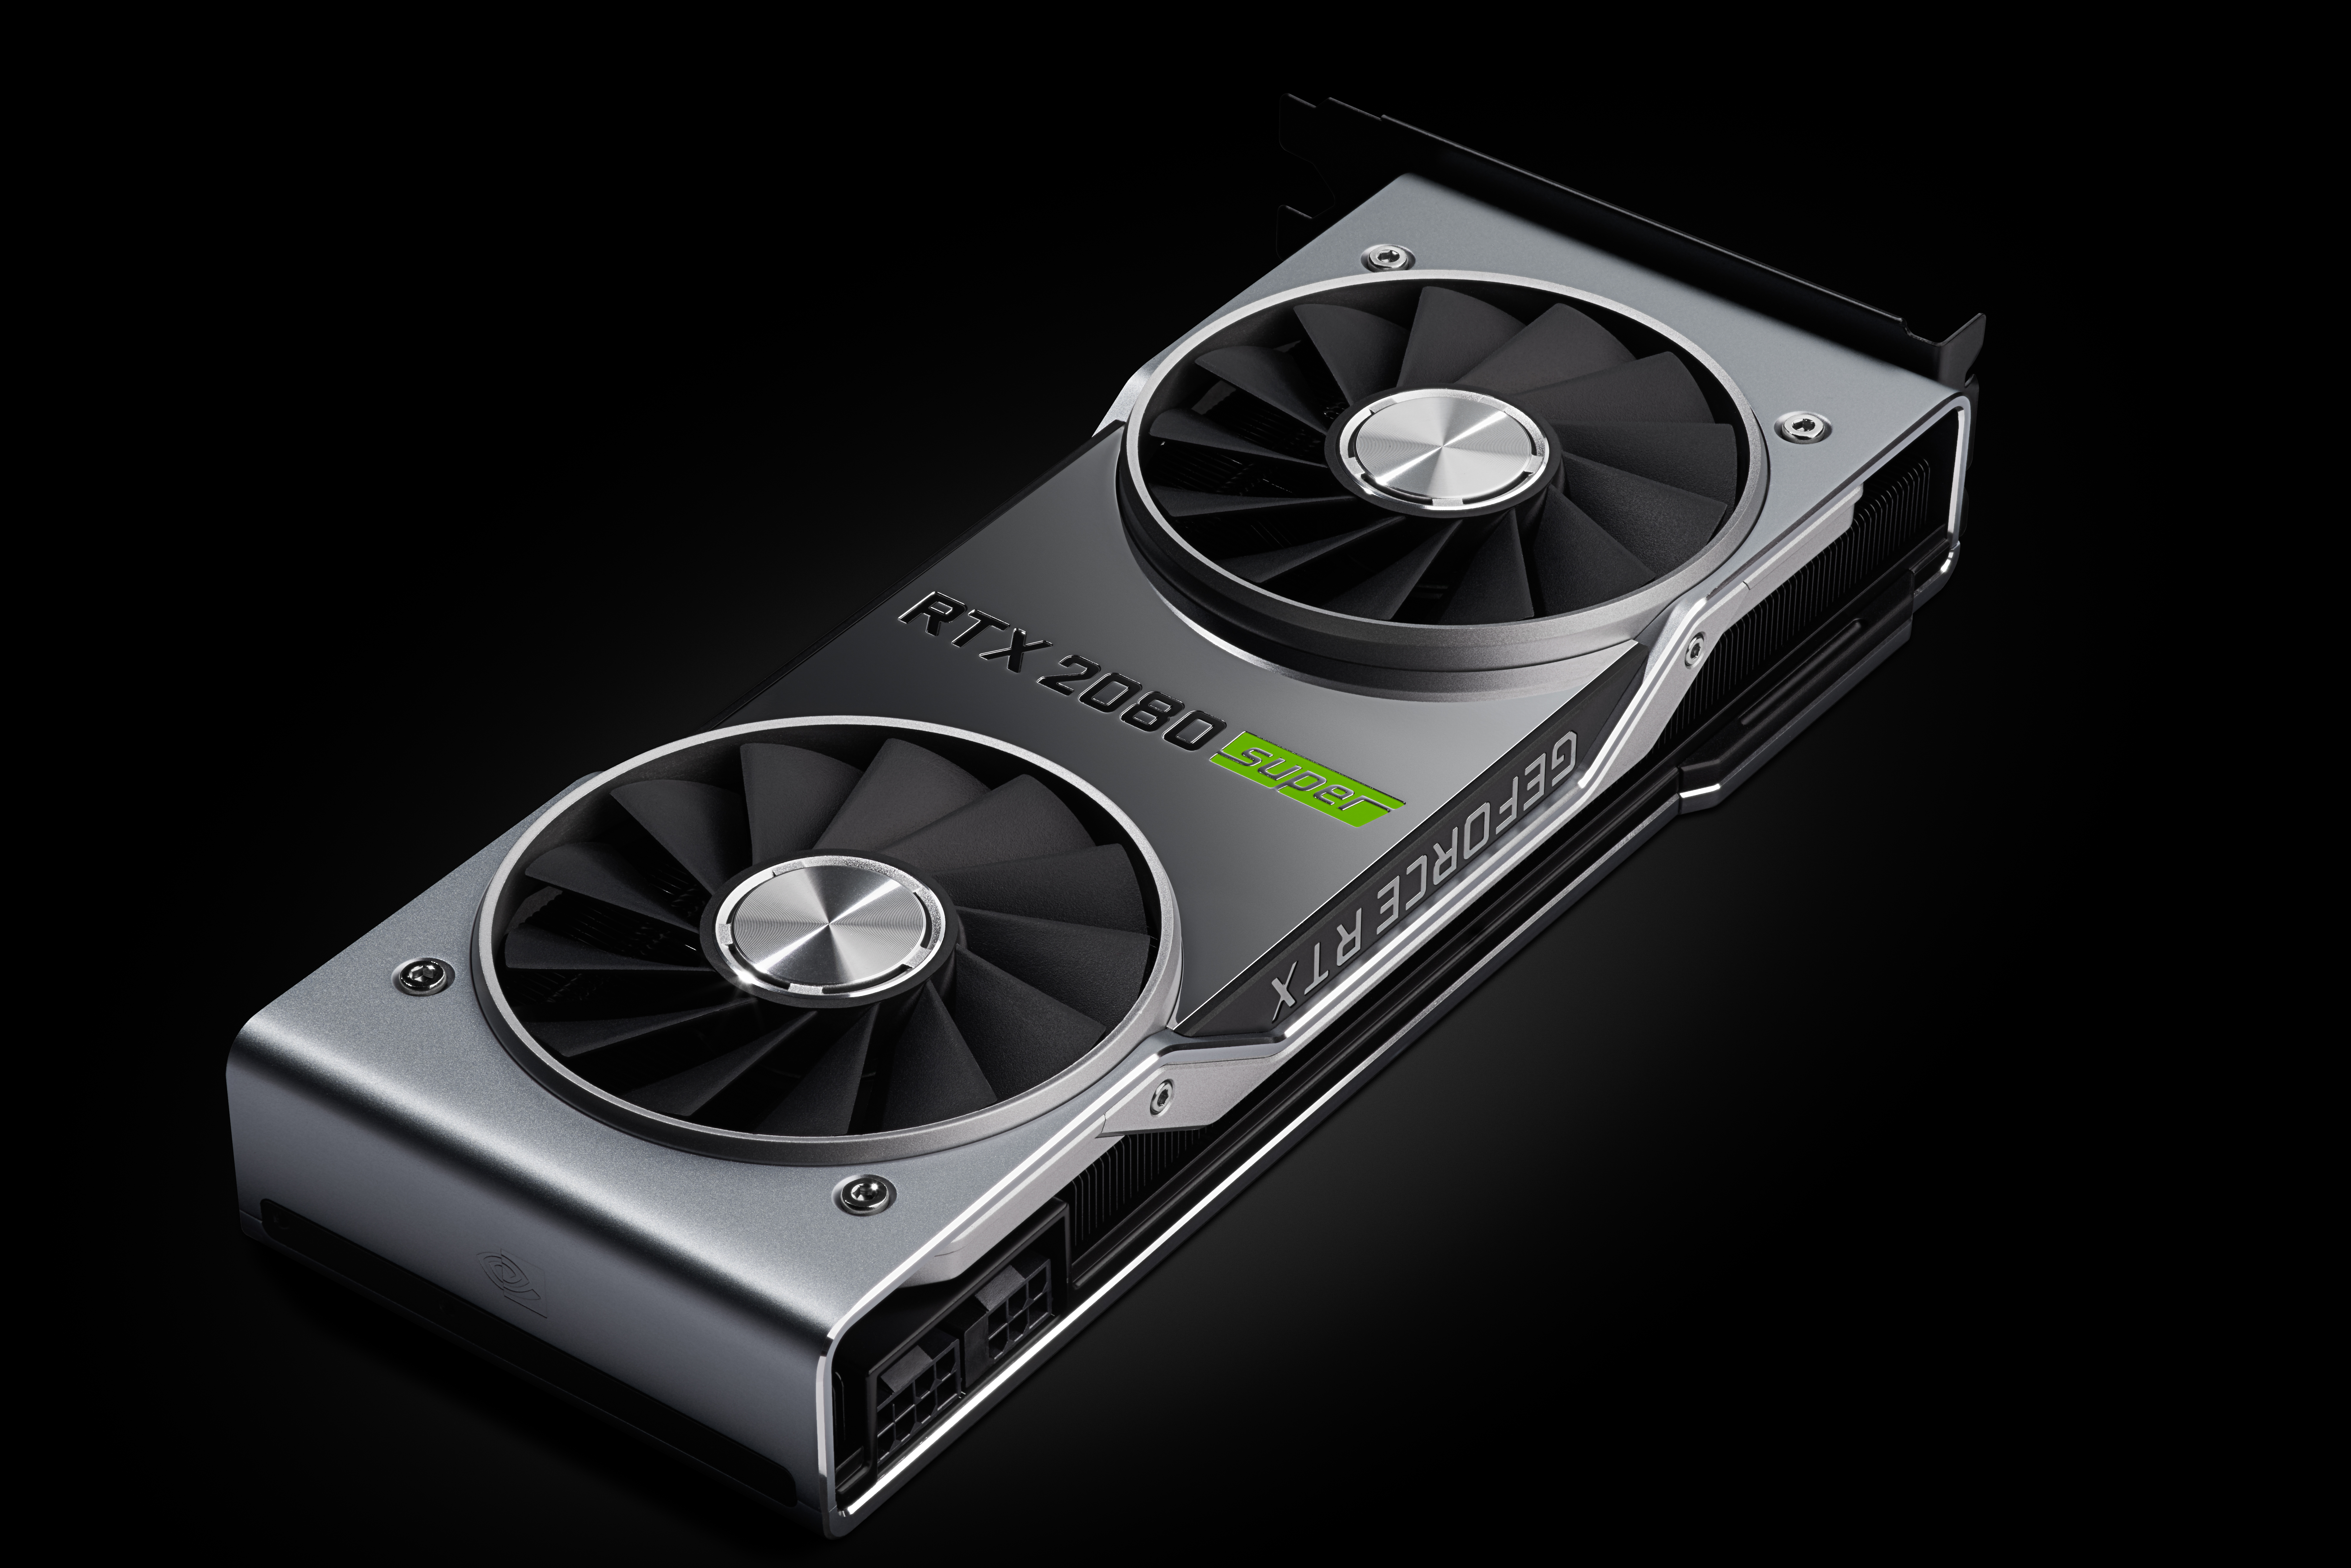 Buy Graphics Cards in India online at Best Price - family-gadgets.ru